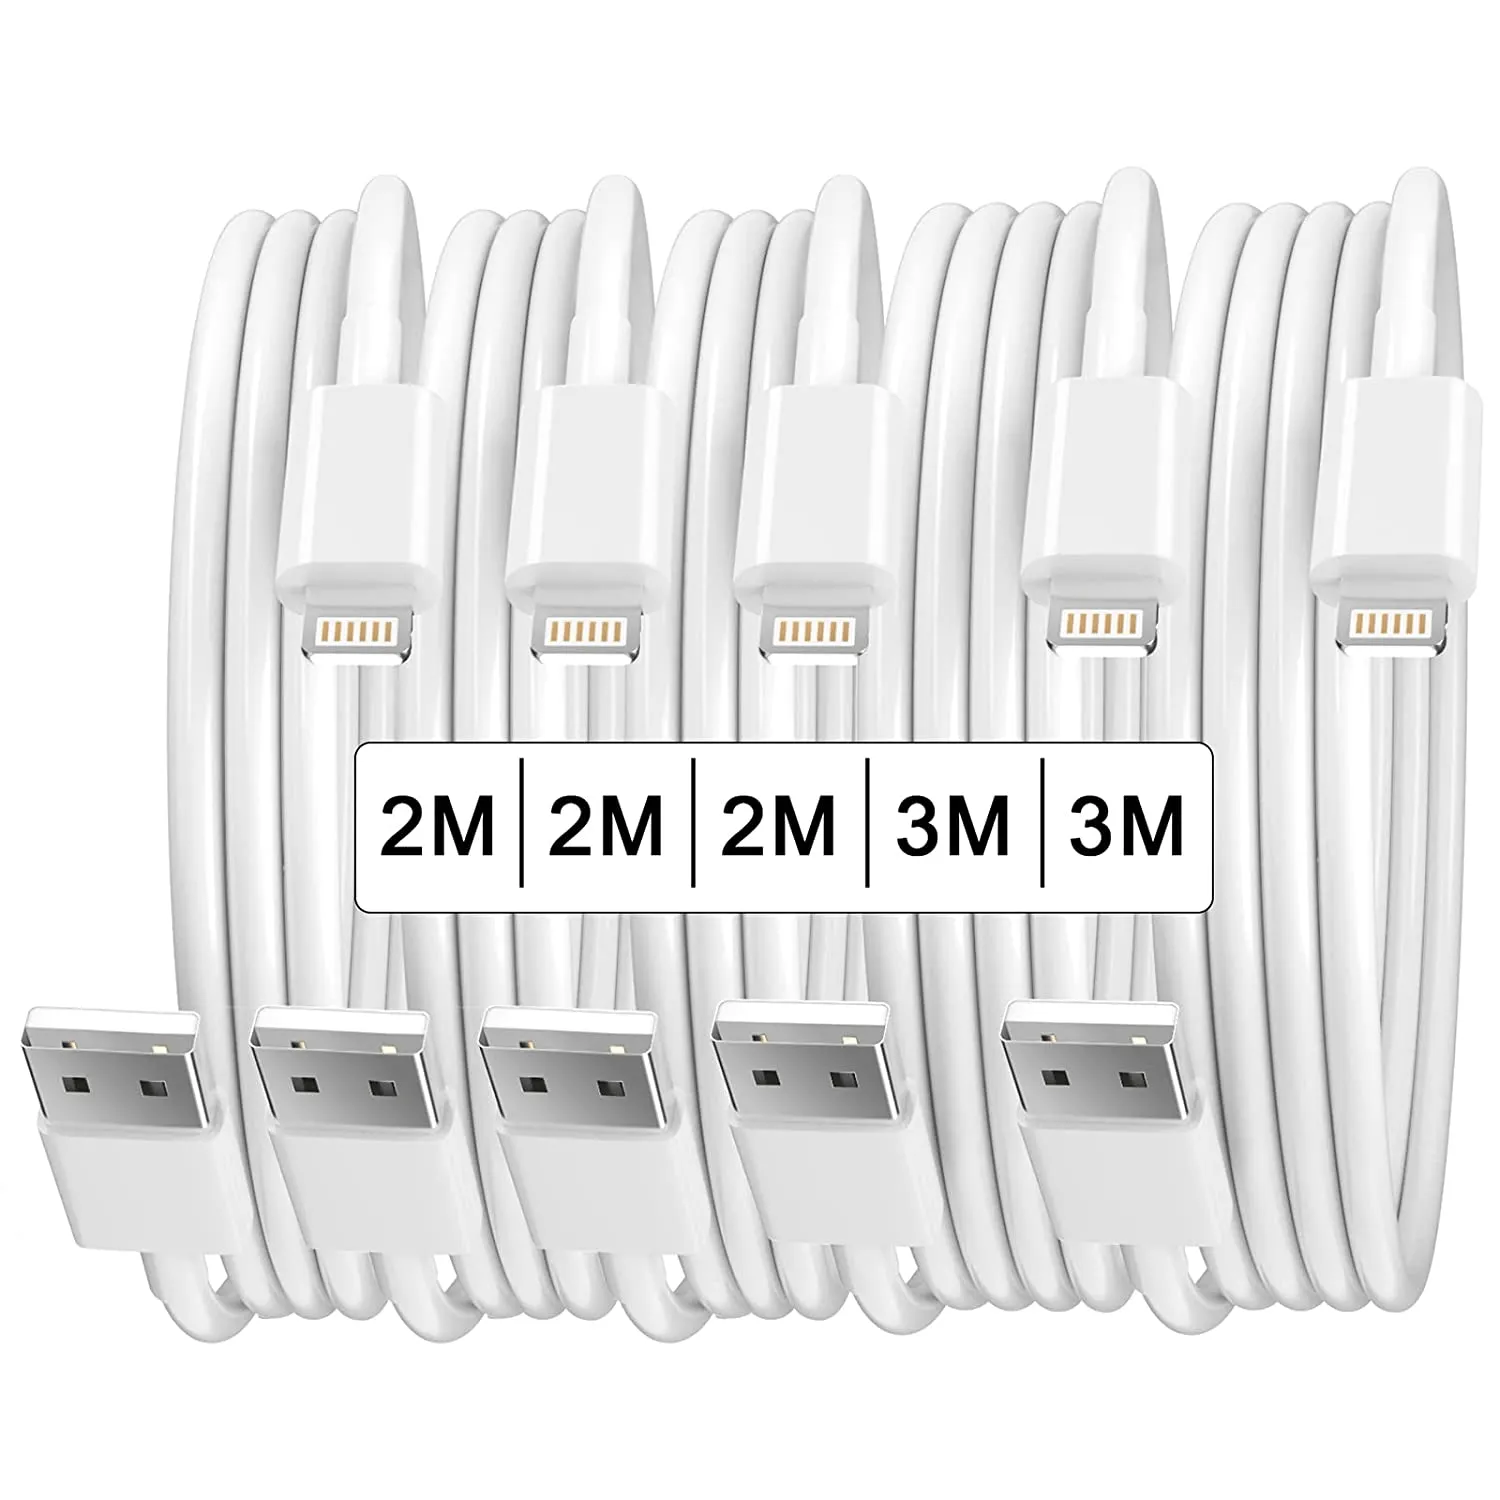 iPhone Charger cable, Lightning Cable